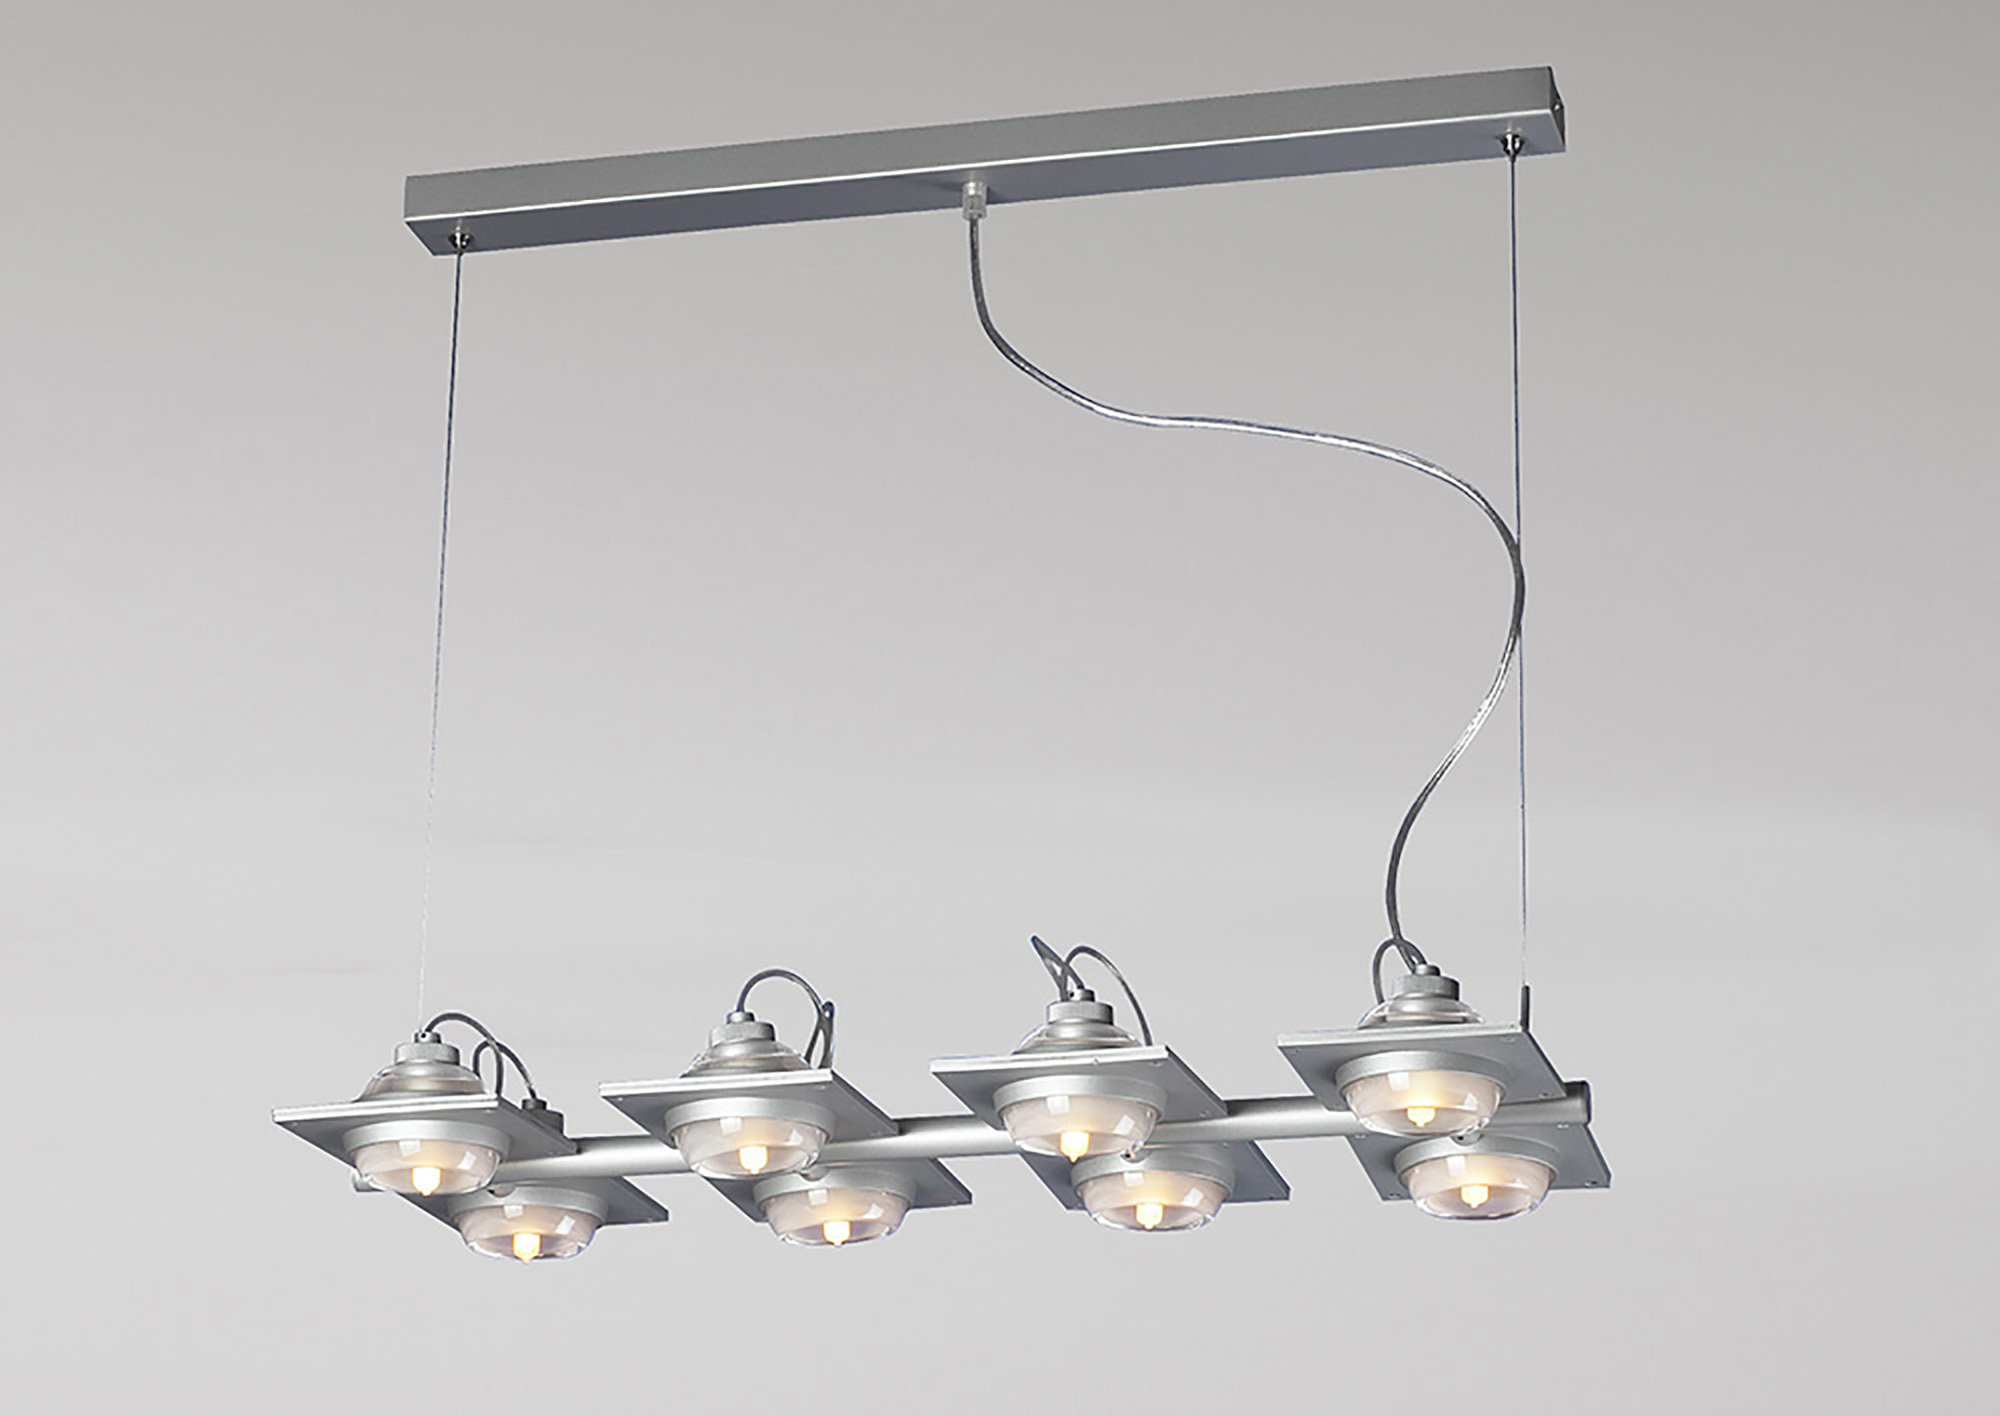 Ull Ceiling Lights Mantra Linear Fittings